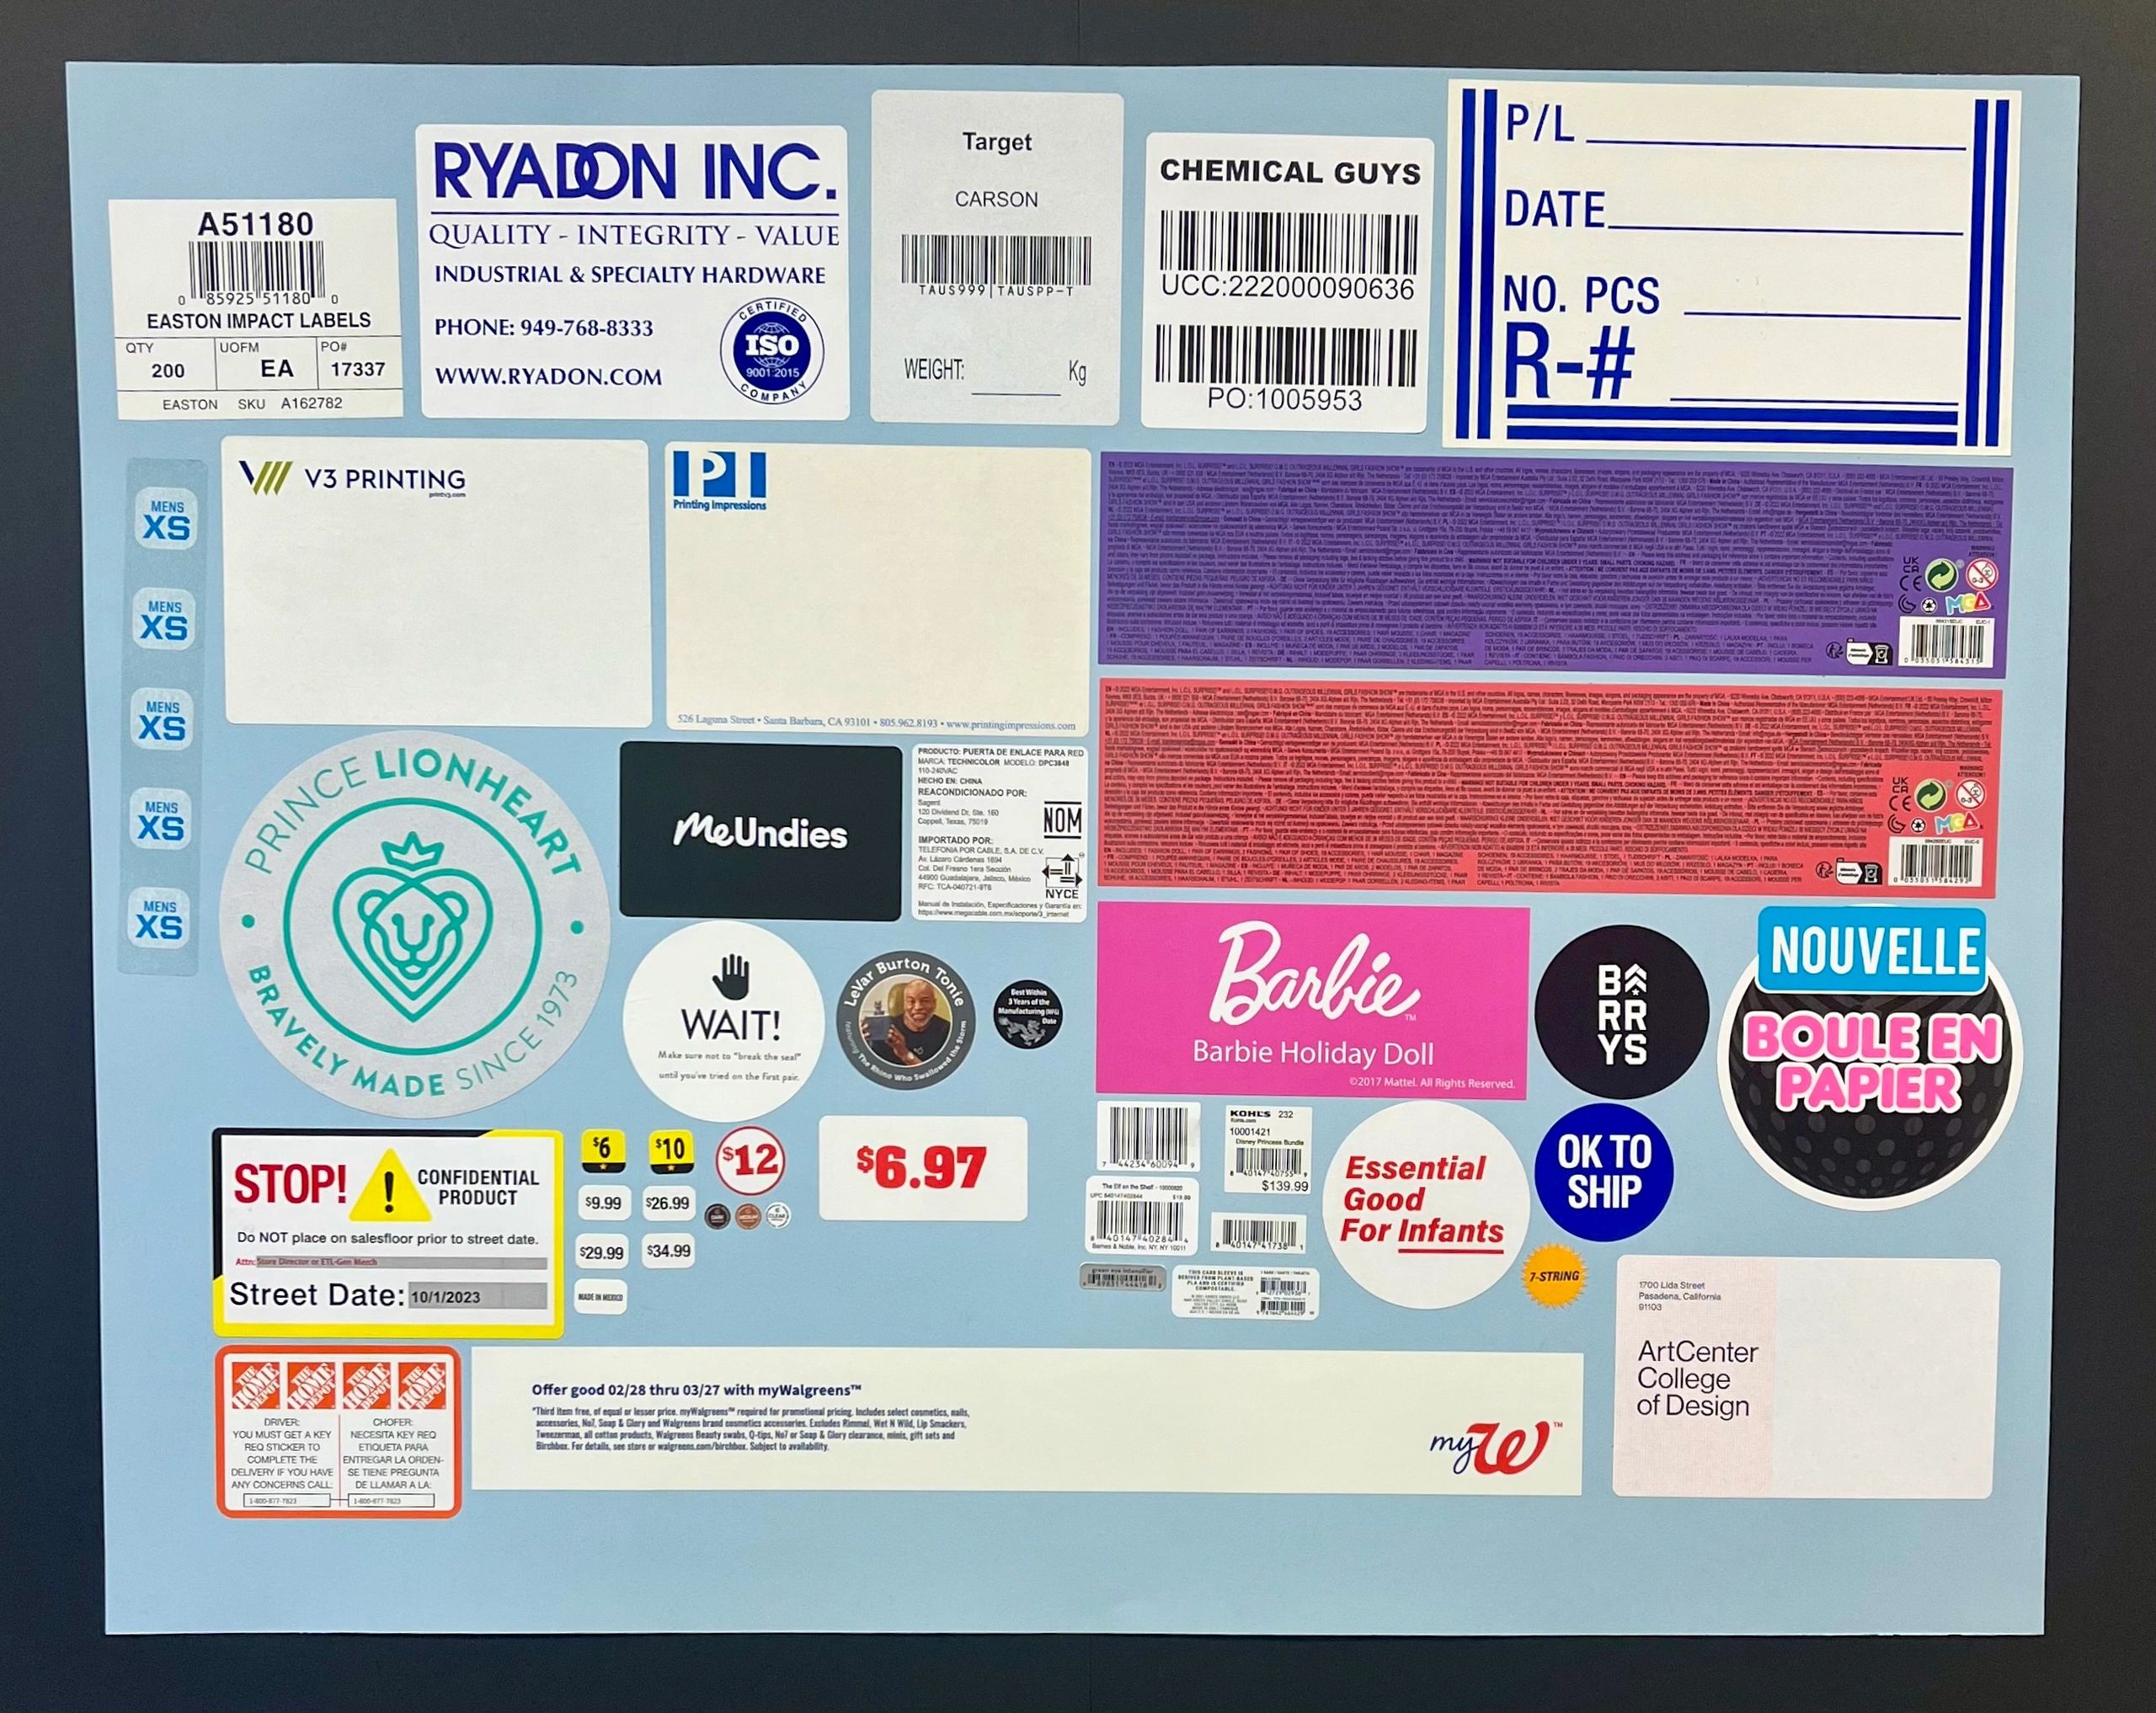 Packaging labels, shipping labels, barcode labels, UPC labels, price point labels, cover up labels